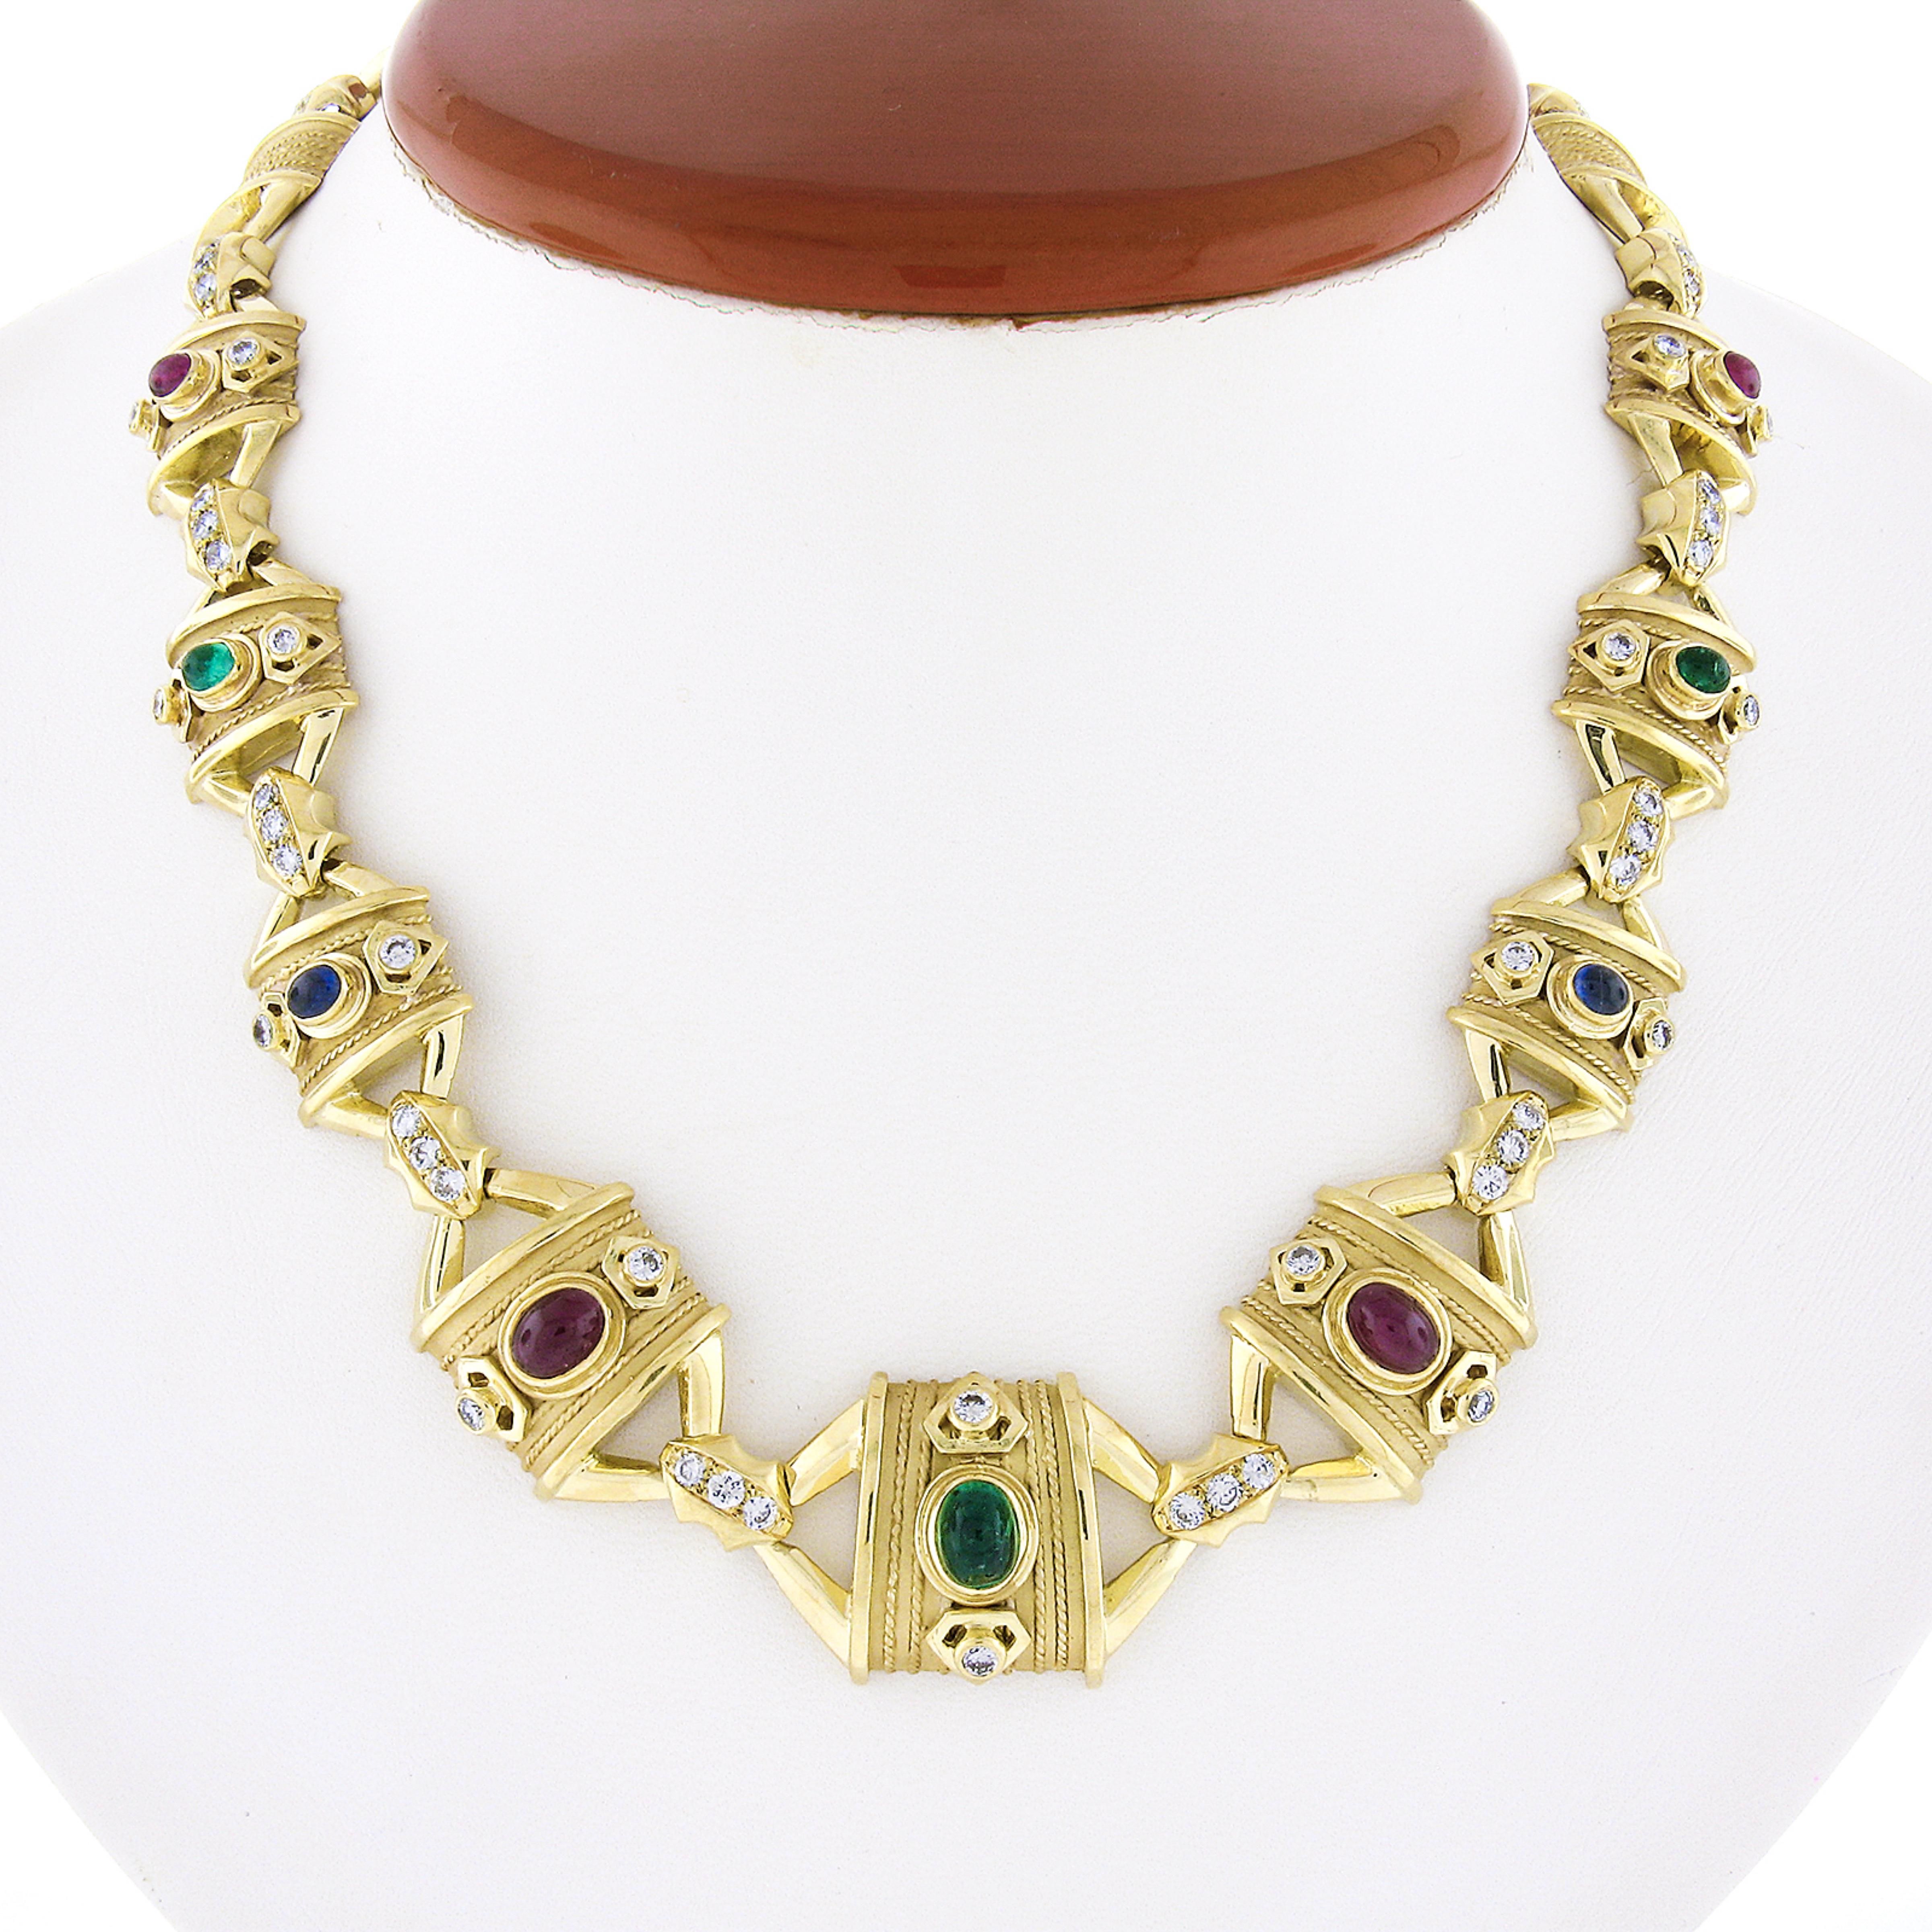 Here we have a very well and solidly made vintage statement necklace that was crafted from solid 18k yellow gold. The necklace features fancy links with a wide and unique design that give the piece a truly outstanding bold look. The links slightly